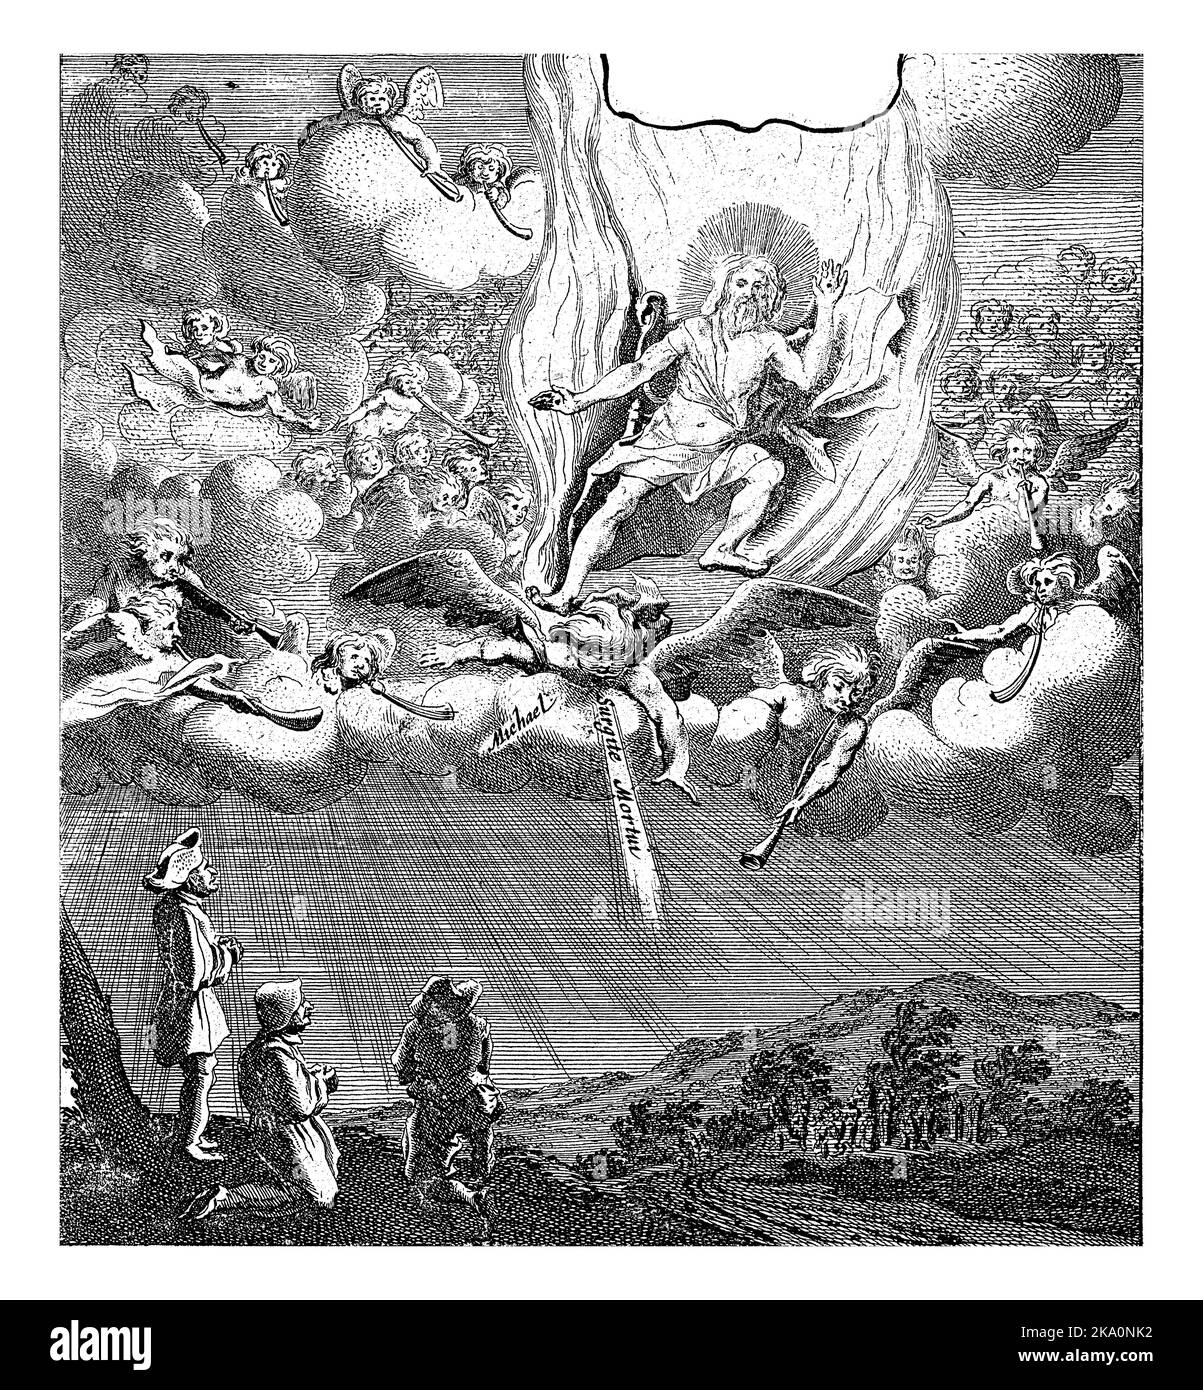 Christ appears in heaven amid a group of trumpeting angels, including the Archangel Michael. People watch from Earth. Stock Photo